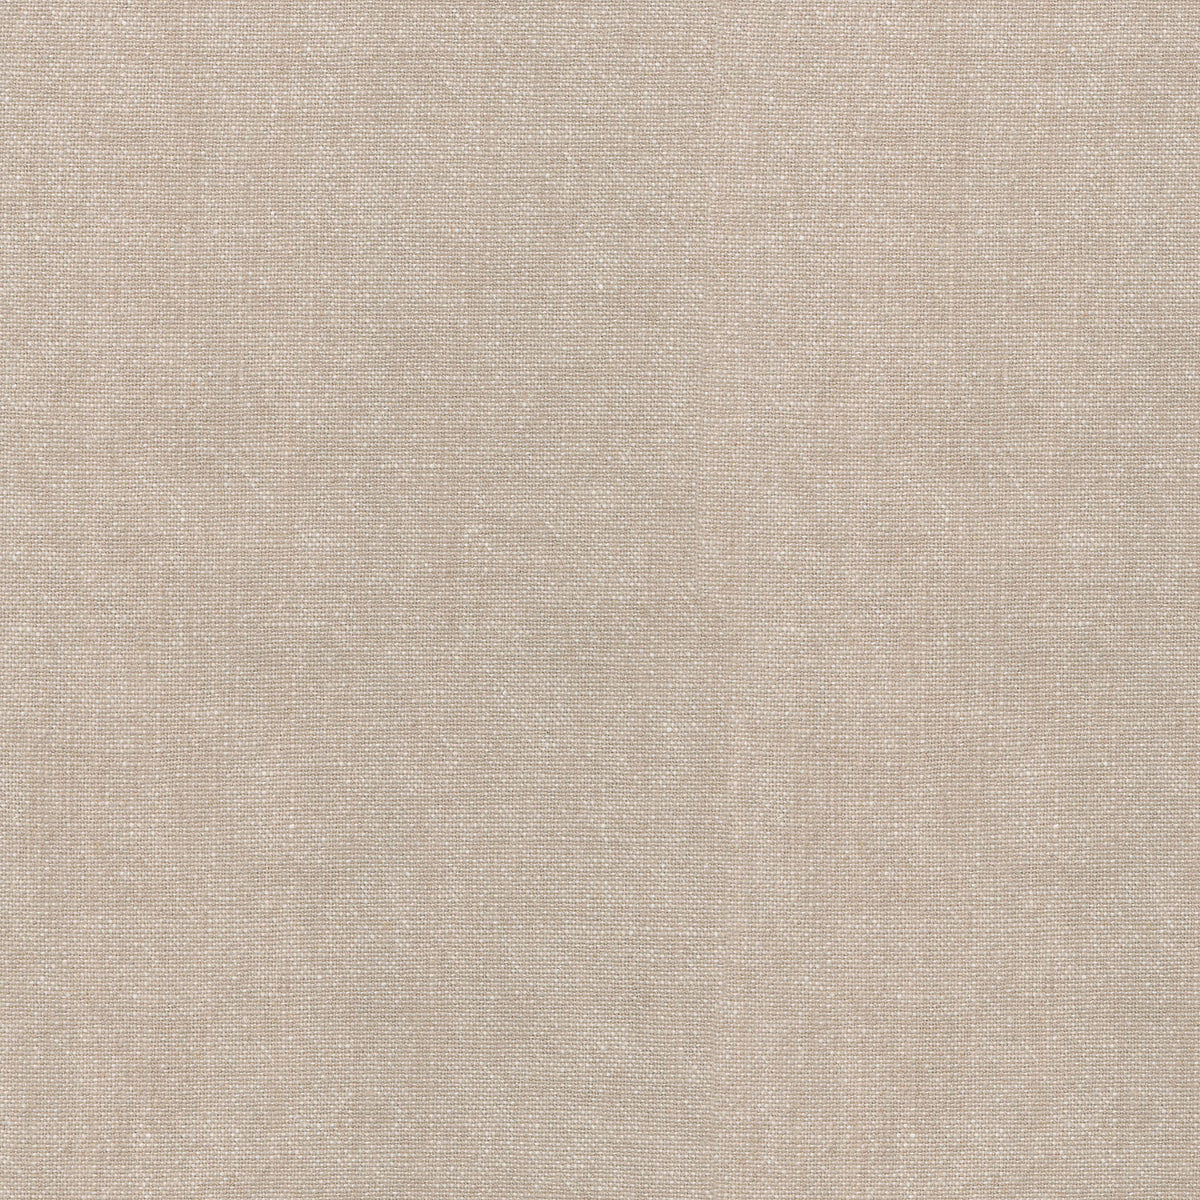 Ellen Degeneres - Cleary Flax 250441 Solid Upholstery Fabric